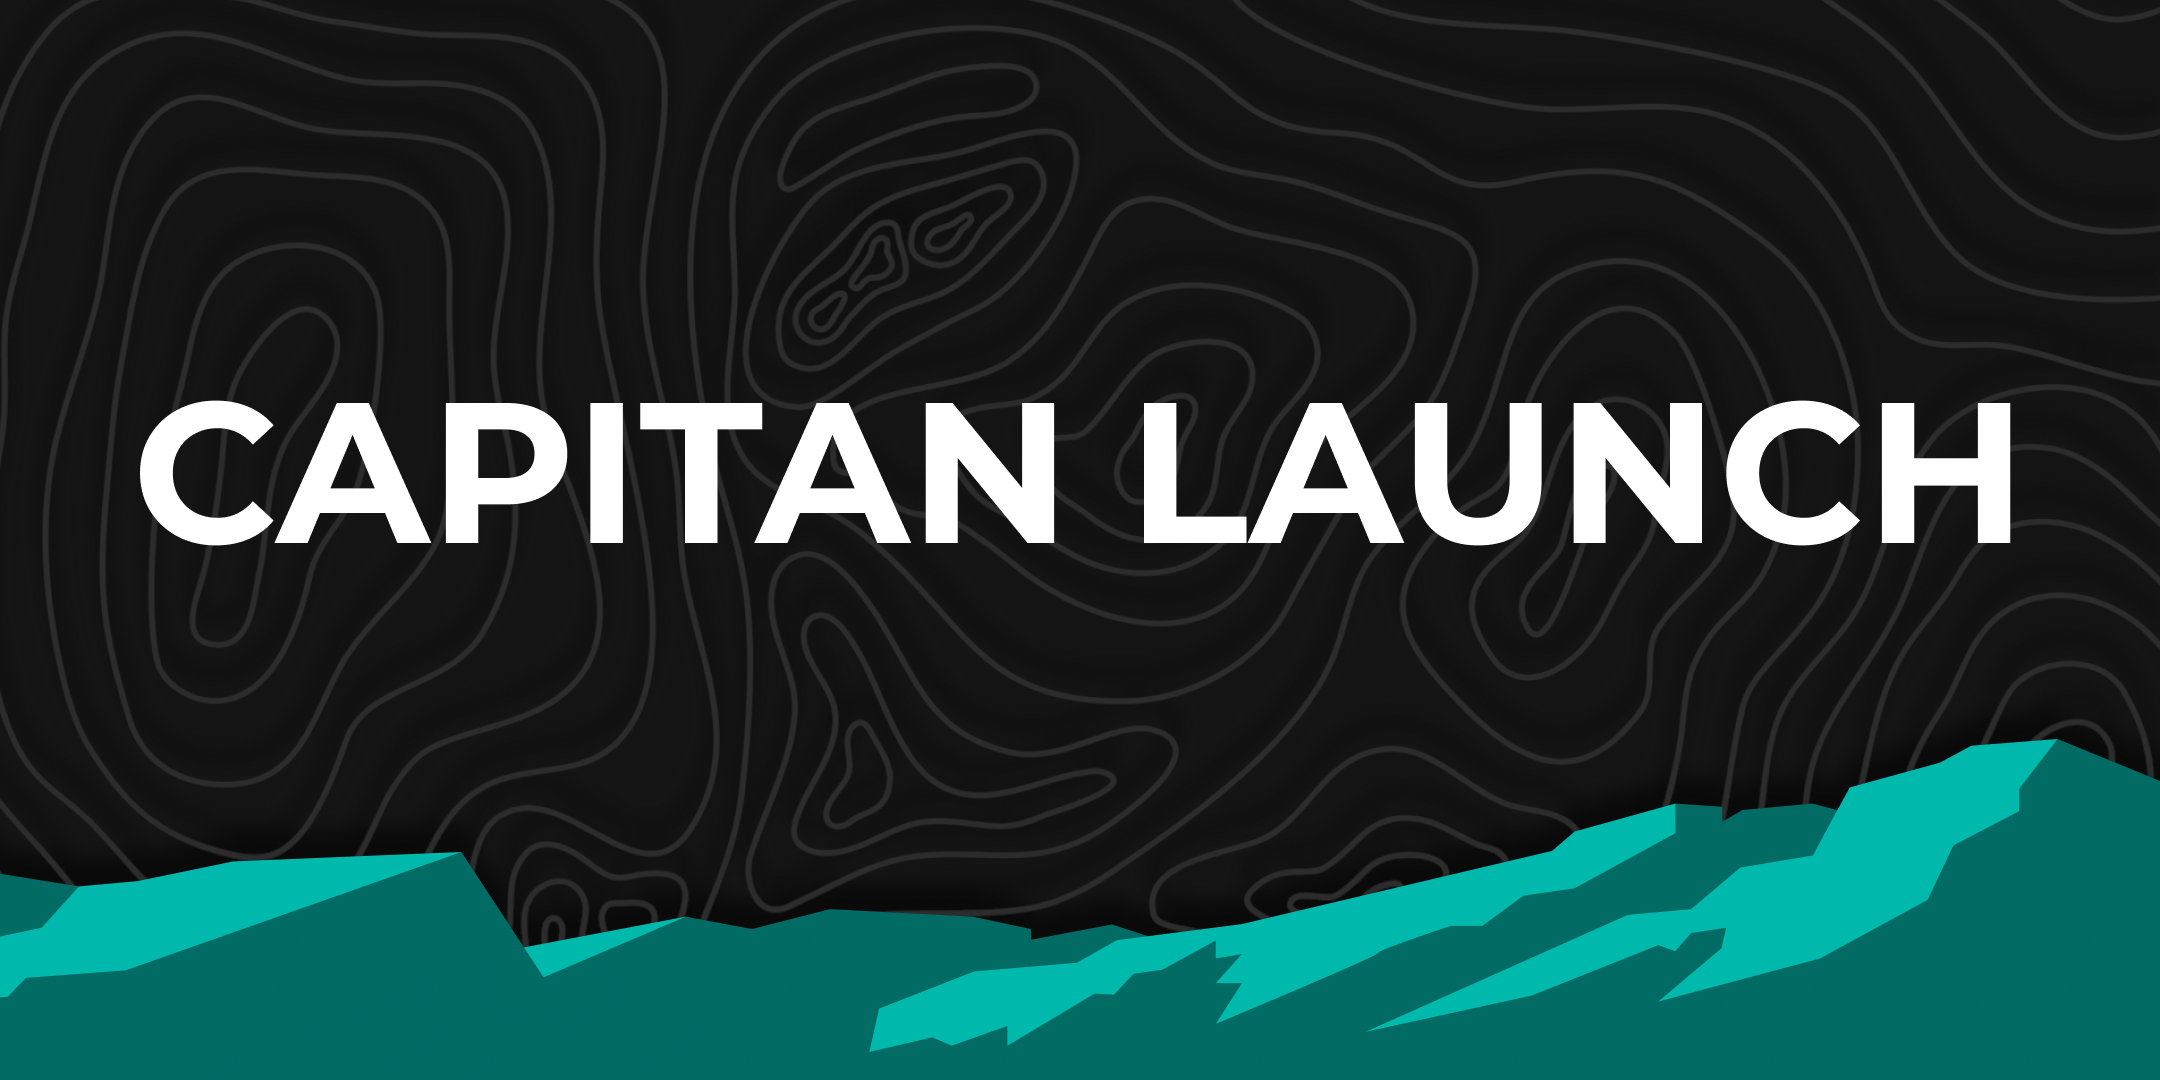 Capitan Announces Capitan Launch, A Program To Help Those Opening Their First Climbing Gym